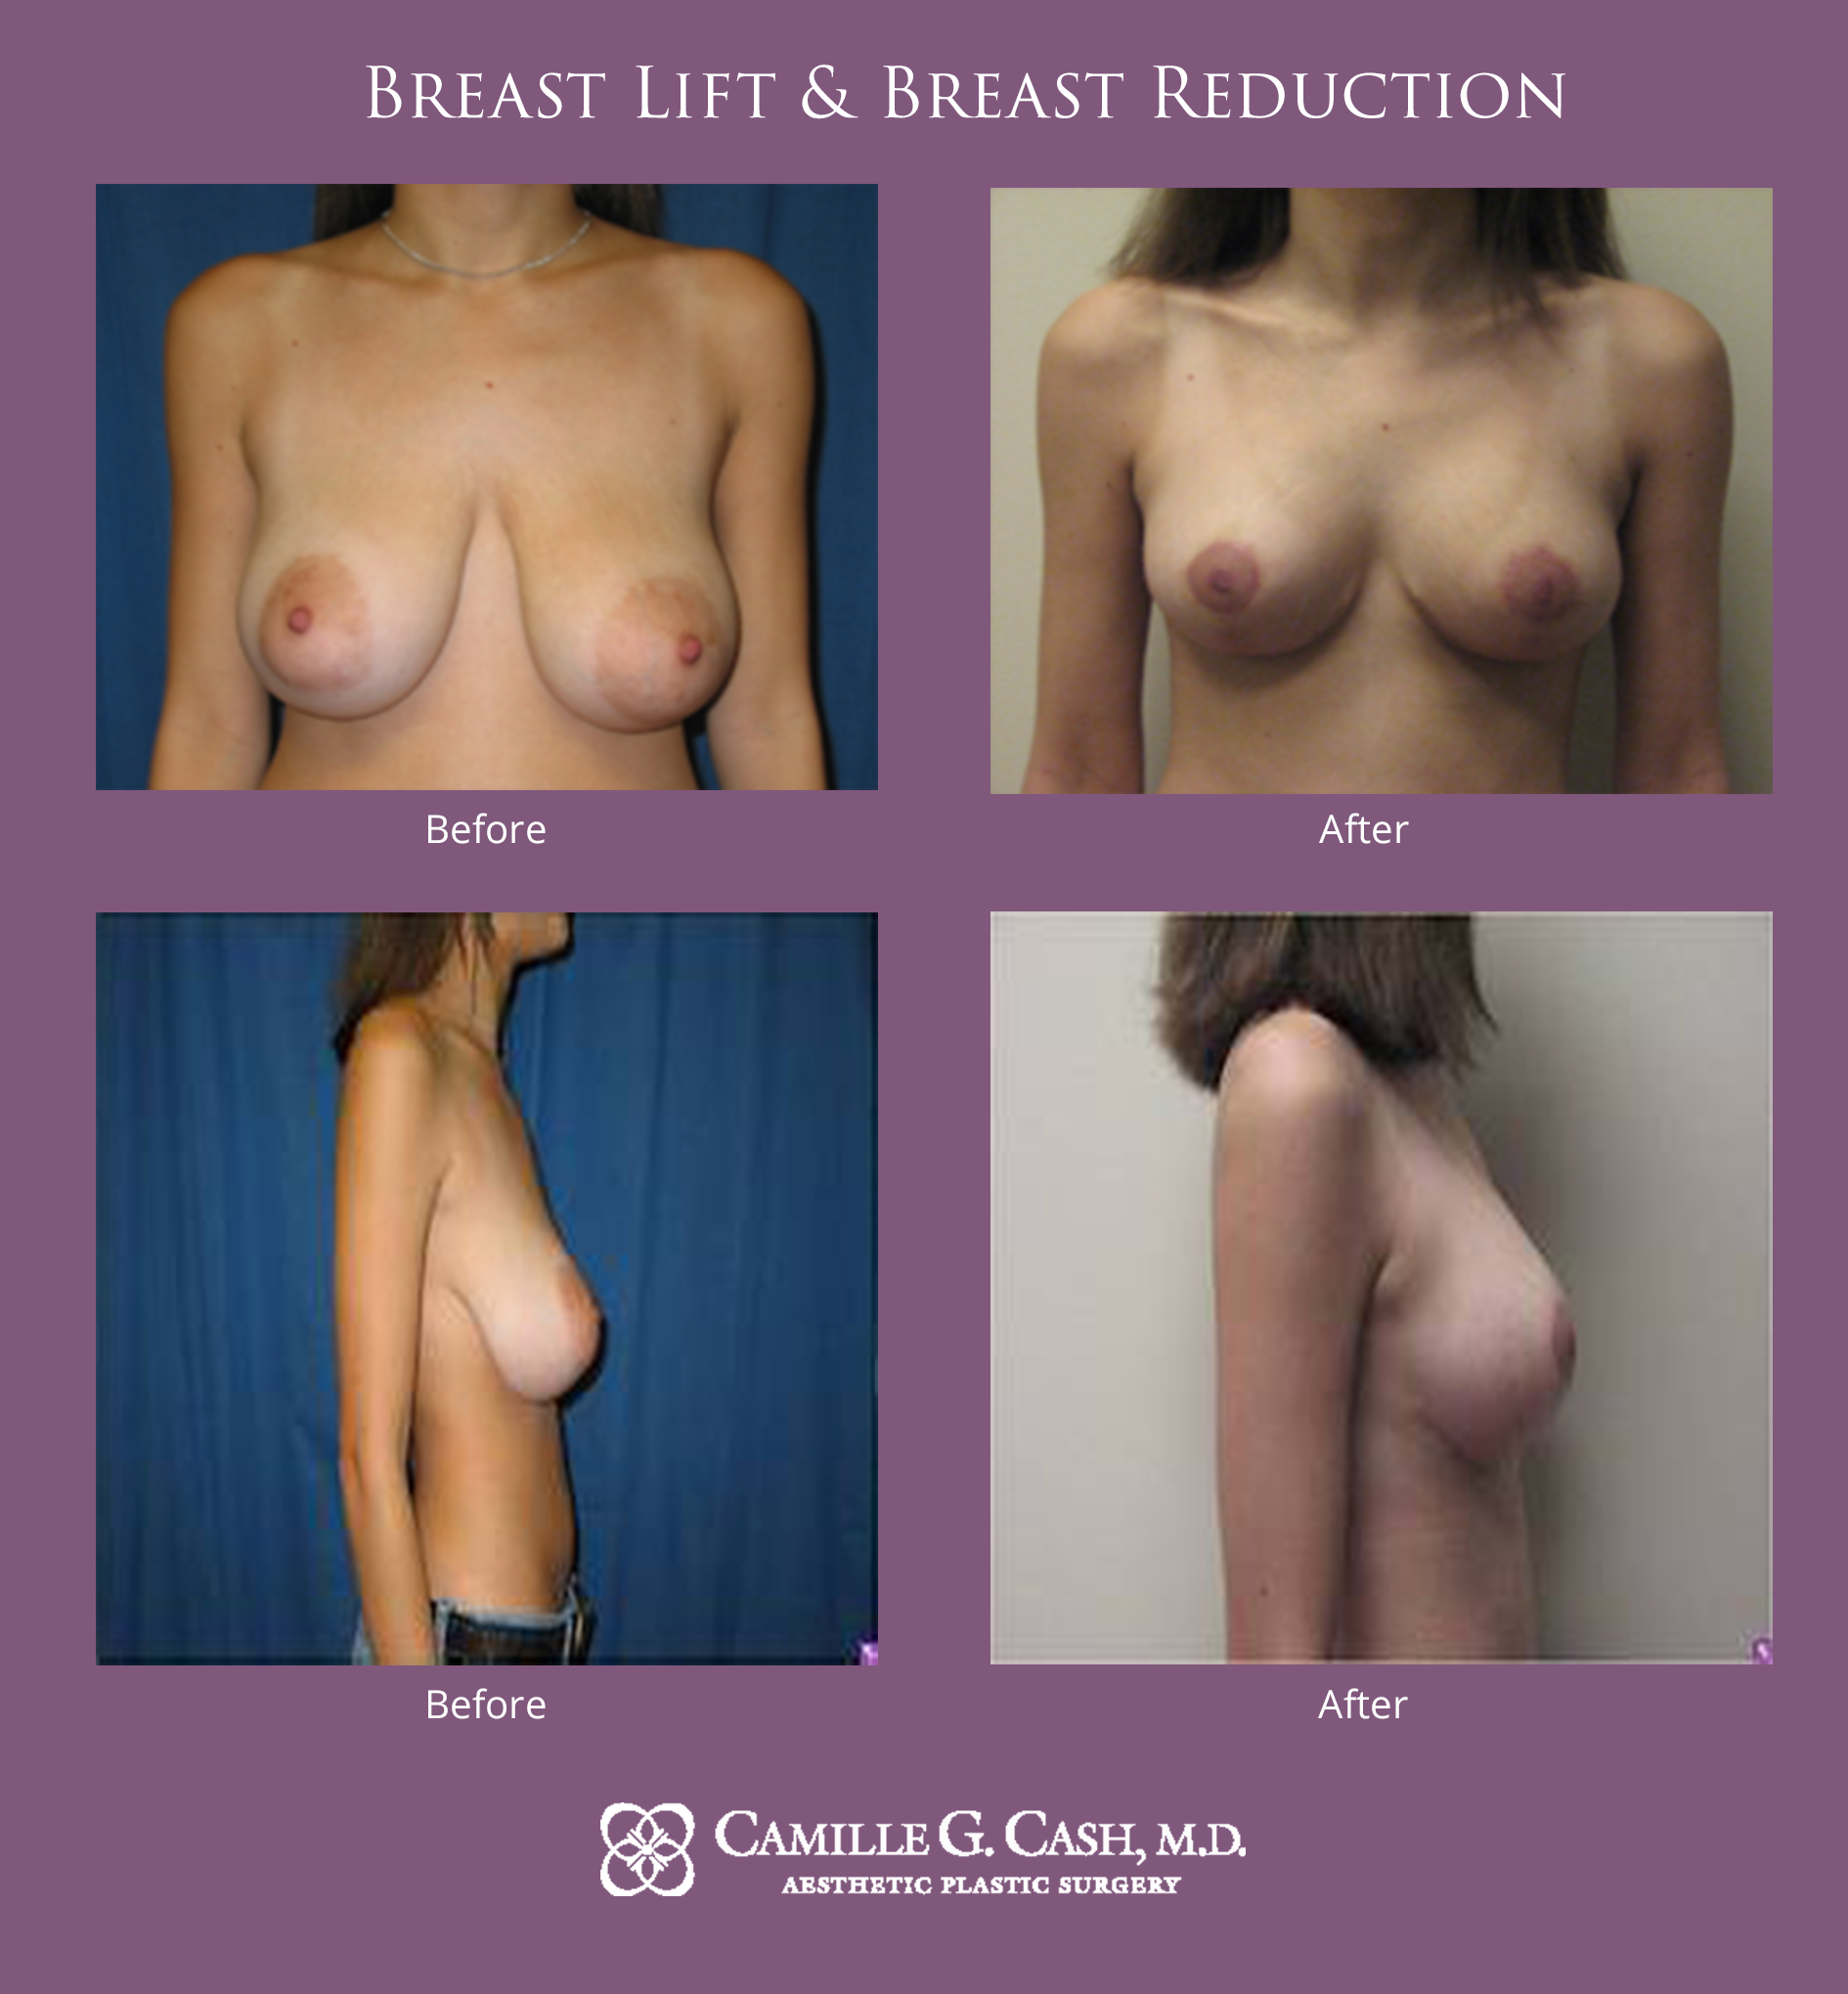 Breast lift and reduction before and after photos